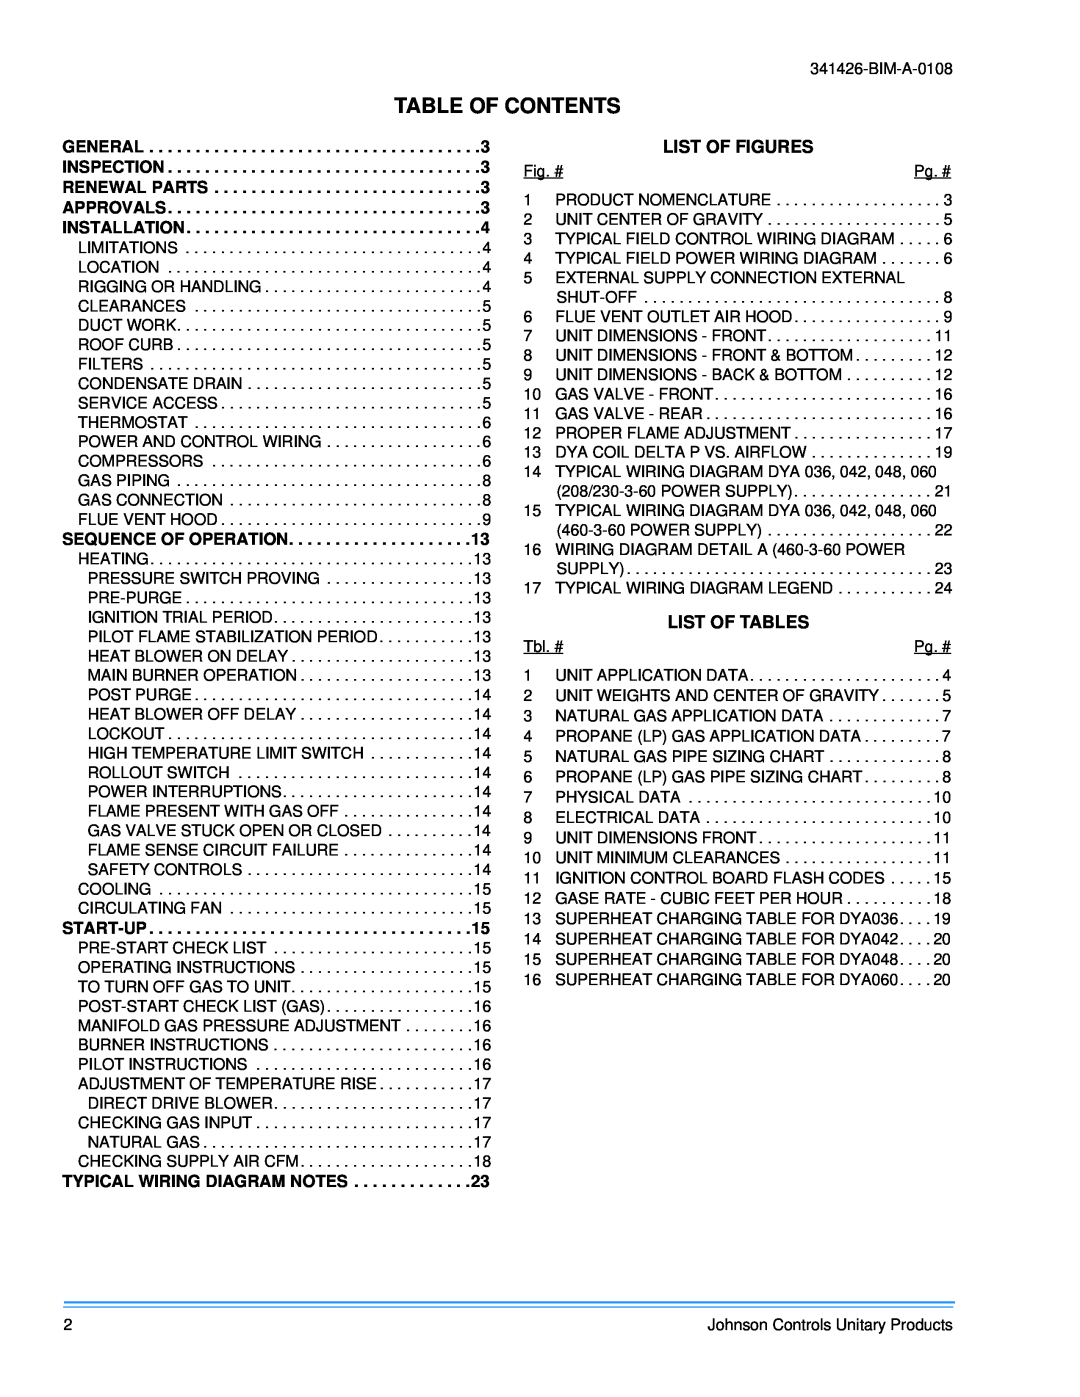 Johnson Controls 341426-BIM-A-0108 installation manual Table Of Contents, List Of Figures, List Of Tables 